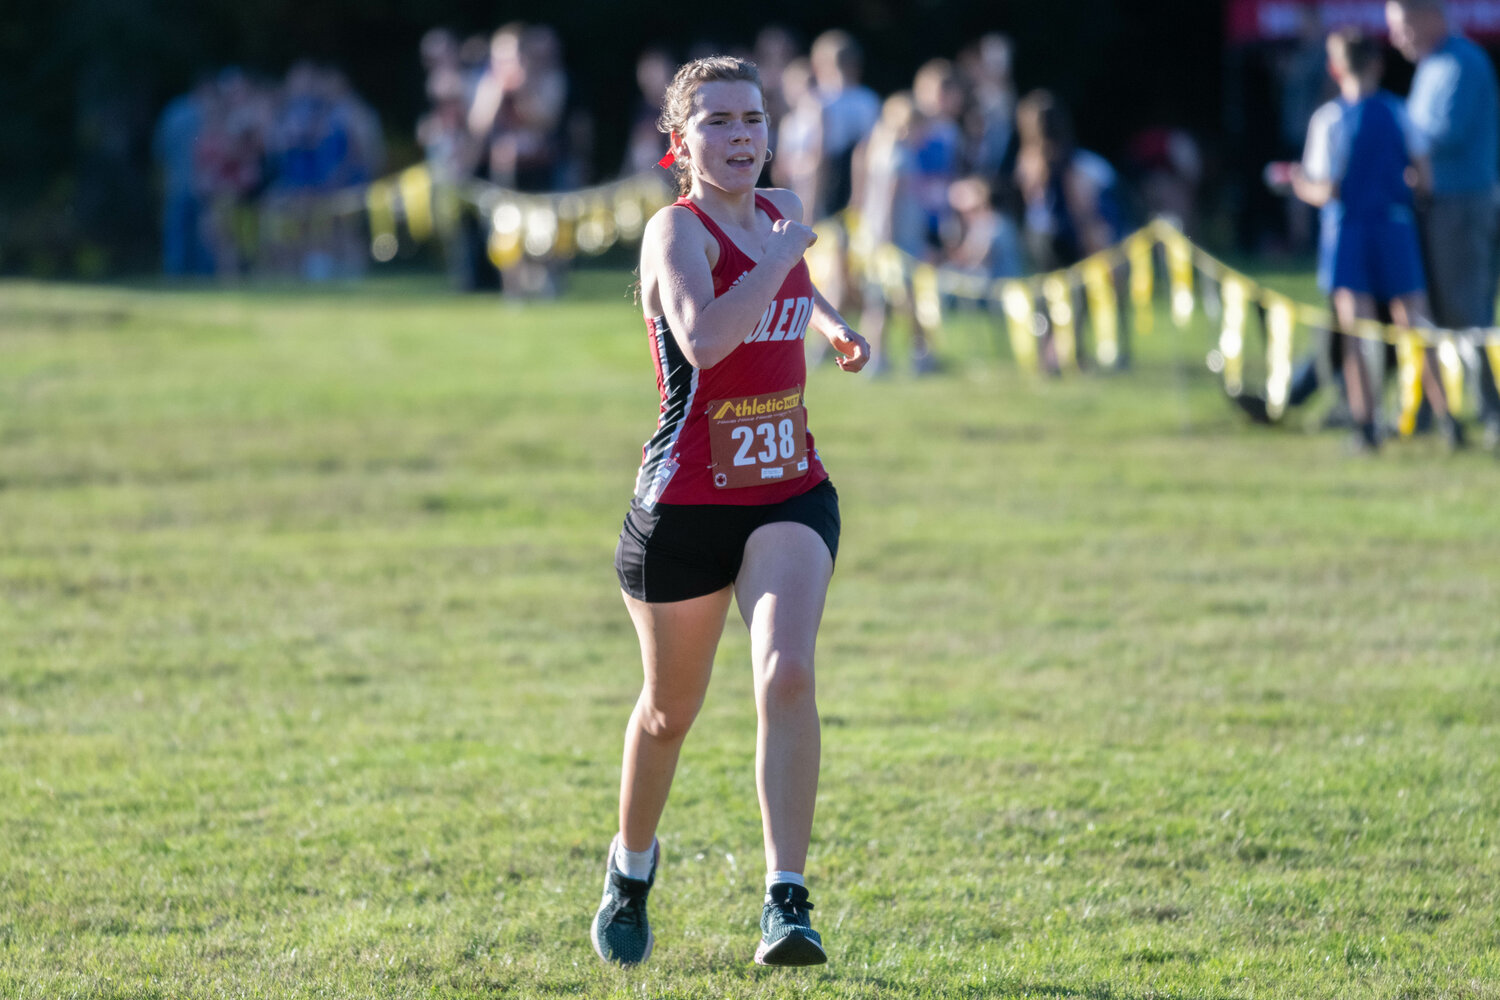 Kasey Landreau comes across the finish line at the C2BL championship meet in Onalaska on Oct. 19.